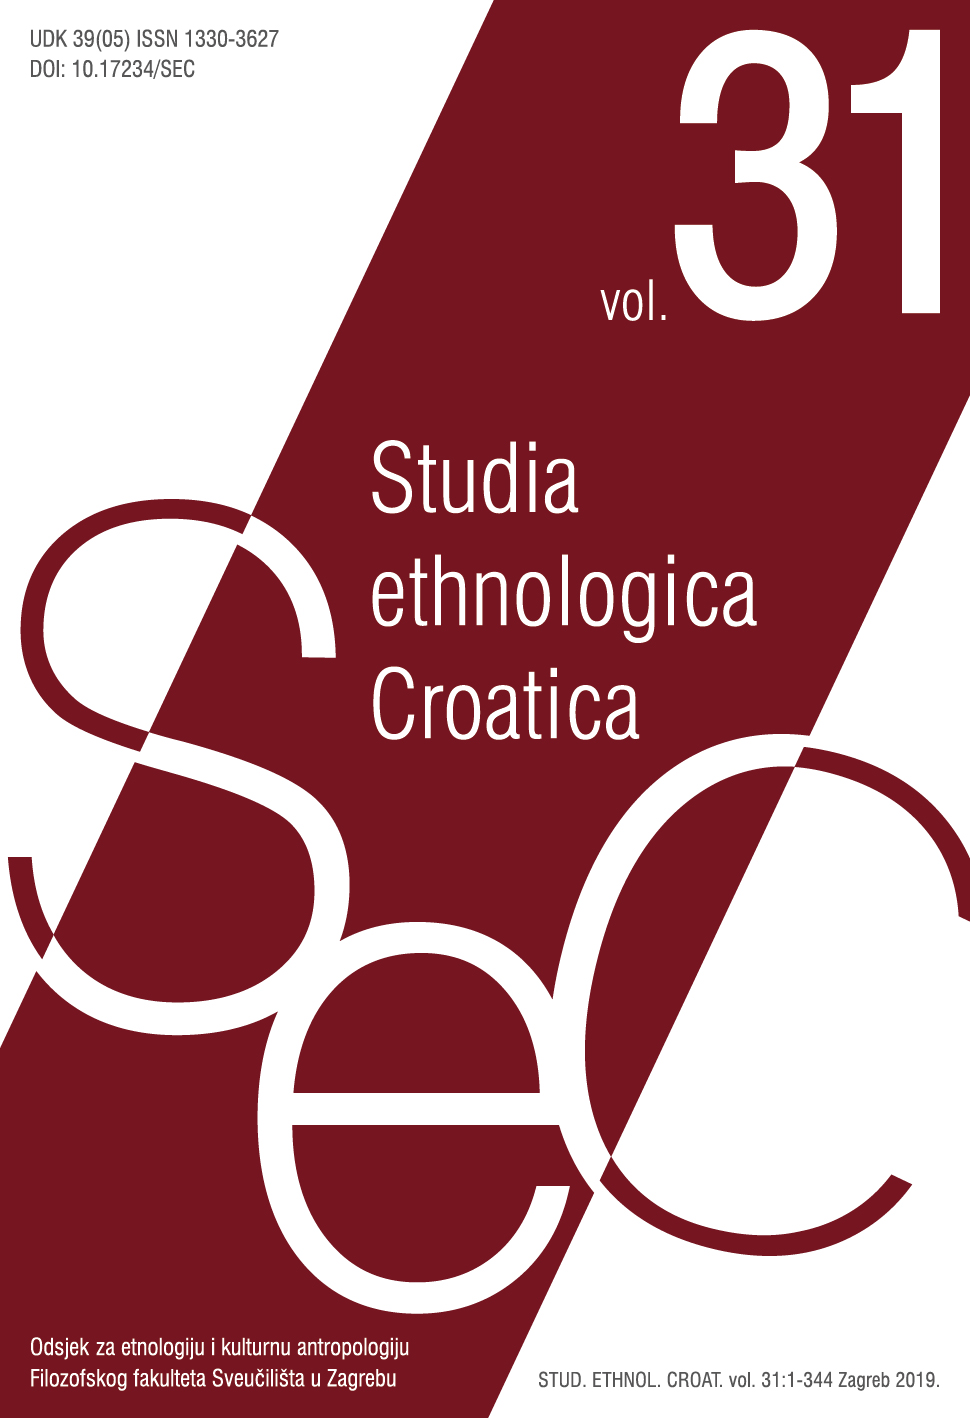 Bibliography of prof. Milana Černelić from 1977 to 2019 Cover Image